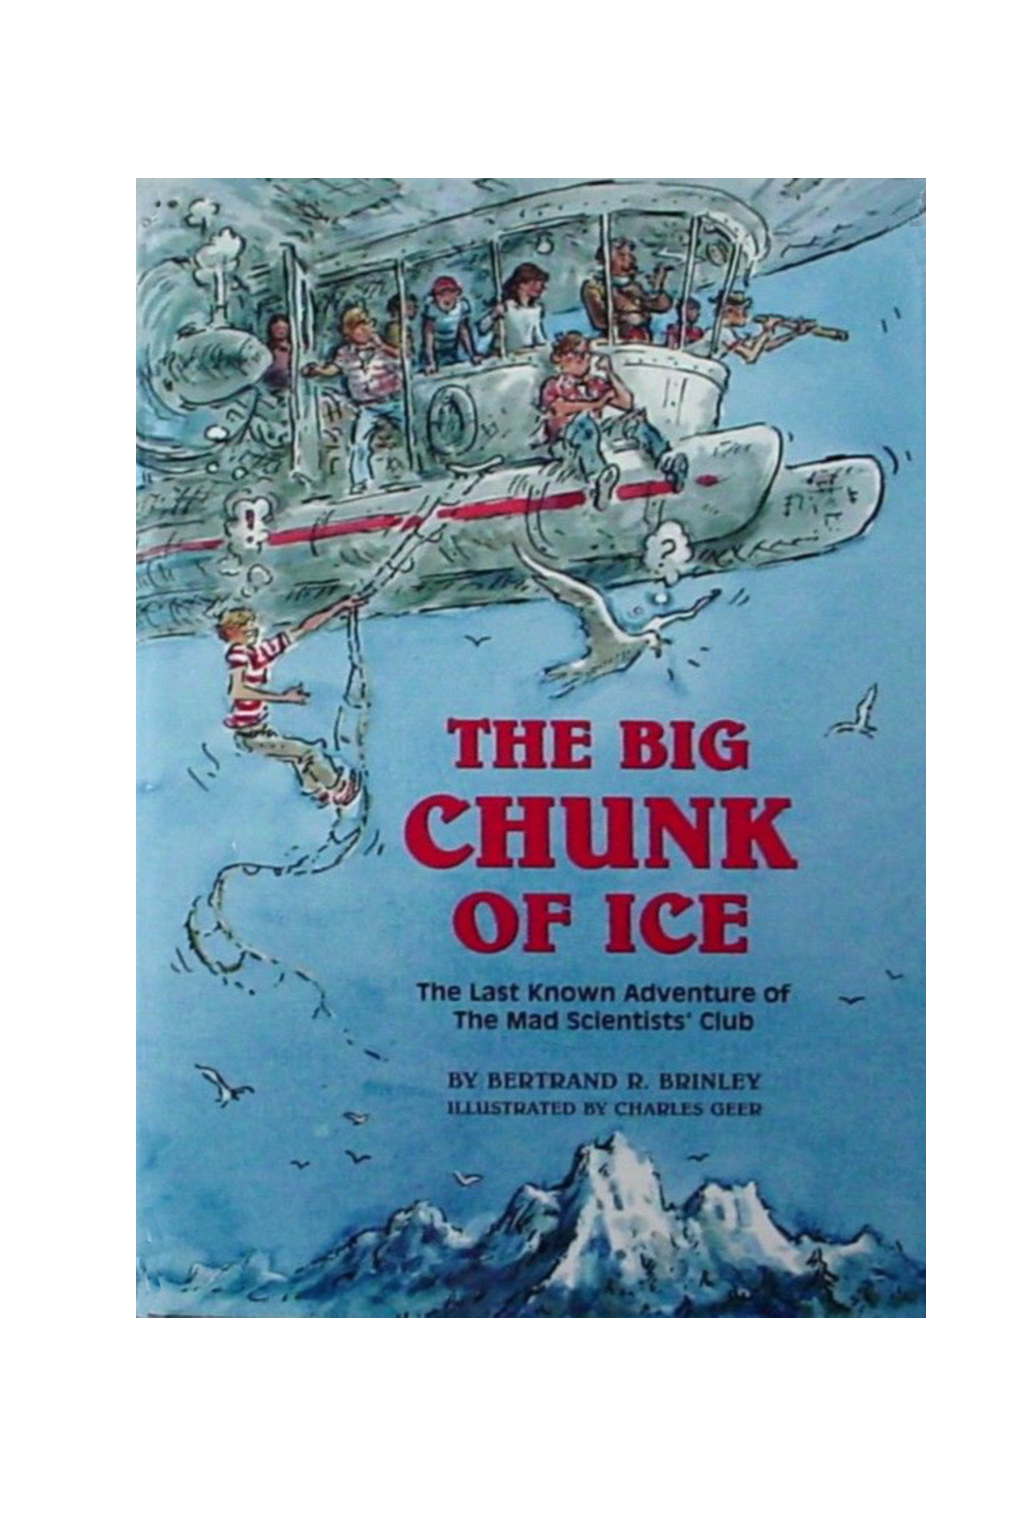 THE BIG CHUNK of ICE: Another Adventure of the Mad Scientists of Mammoth Falls